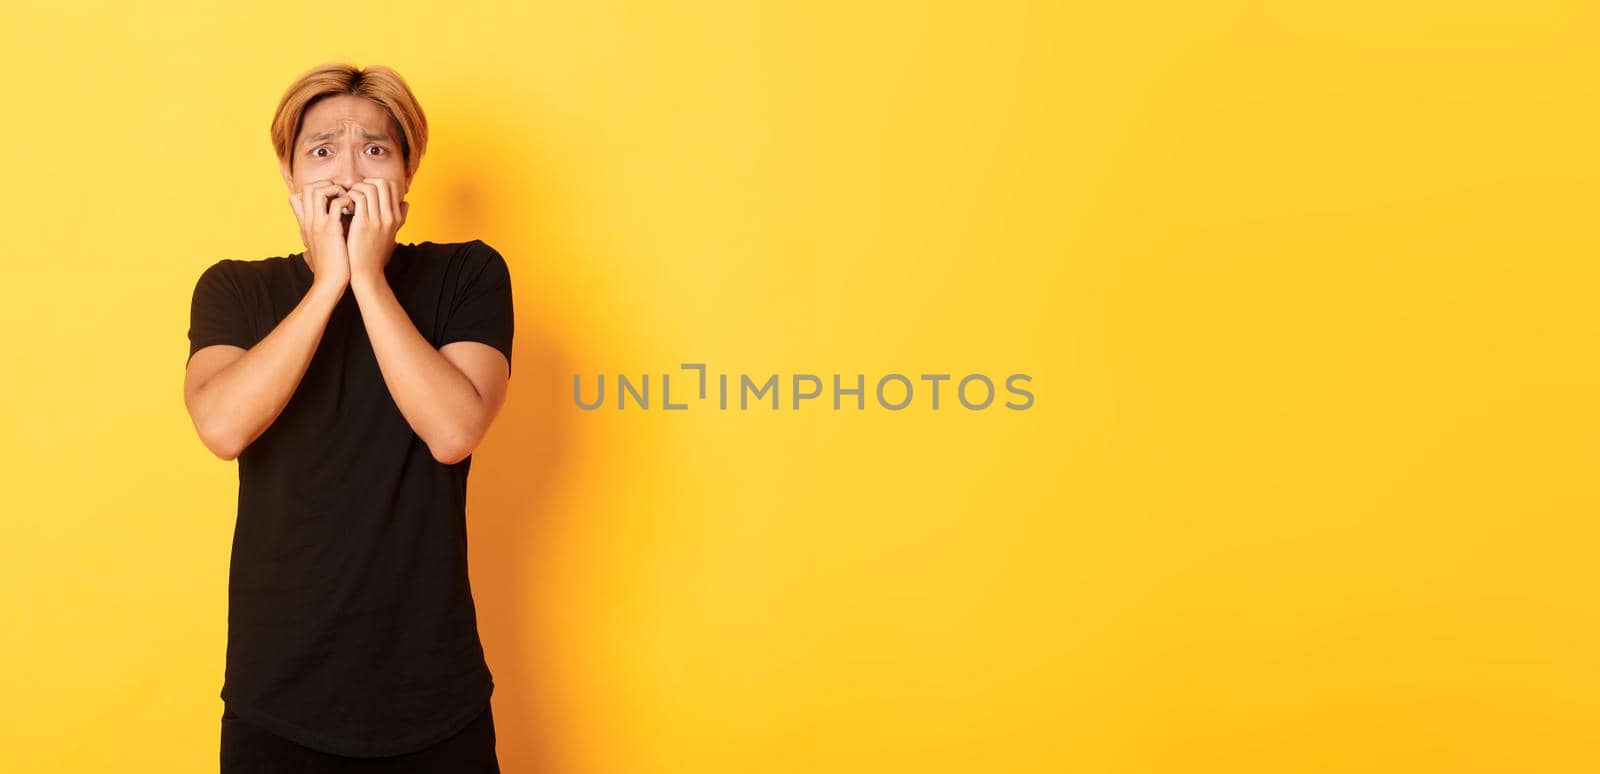 Portrait of scared insecure asian blond guy, holding hands over mouth horrified, looking frightened, yellow background.